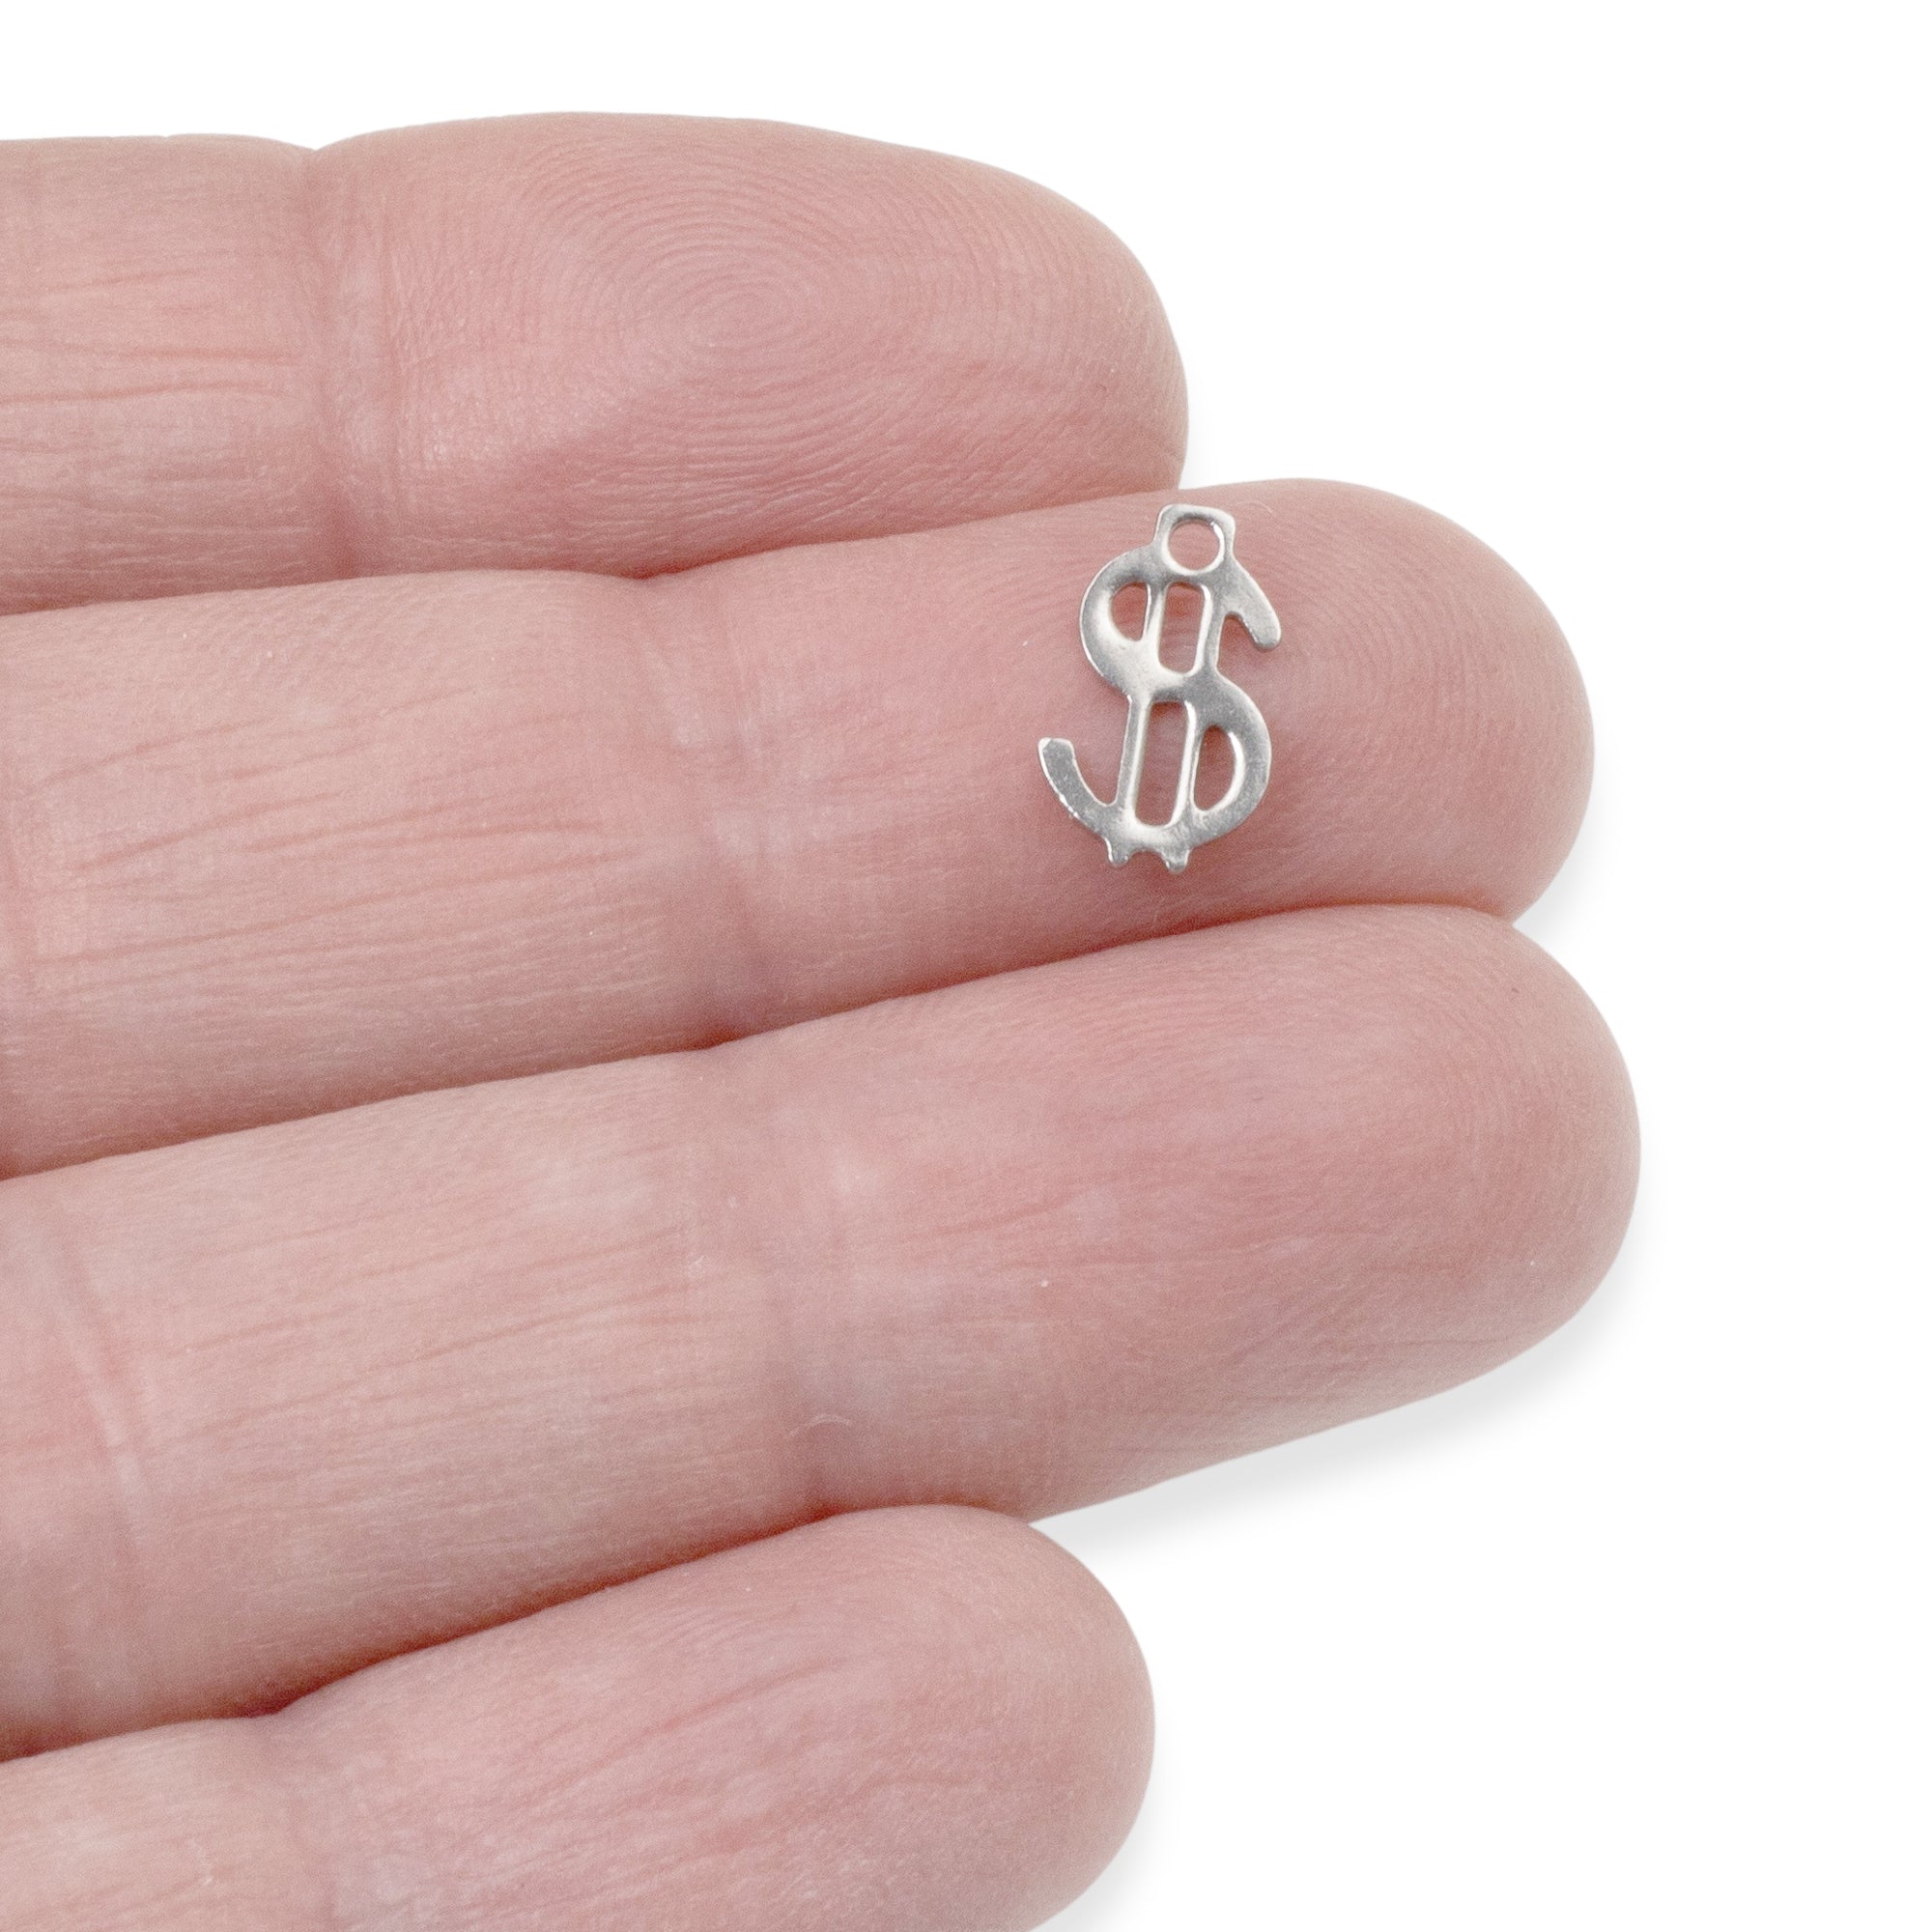 Mini Stainless Steel Dollar Sign Charms | Hackberry Creek